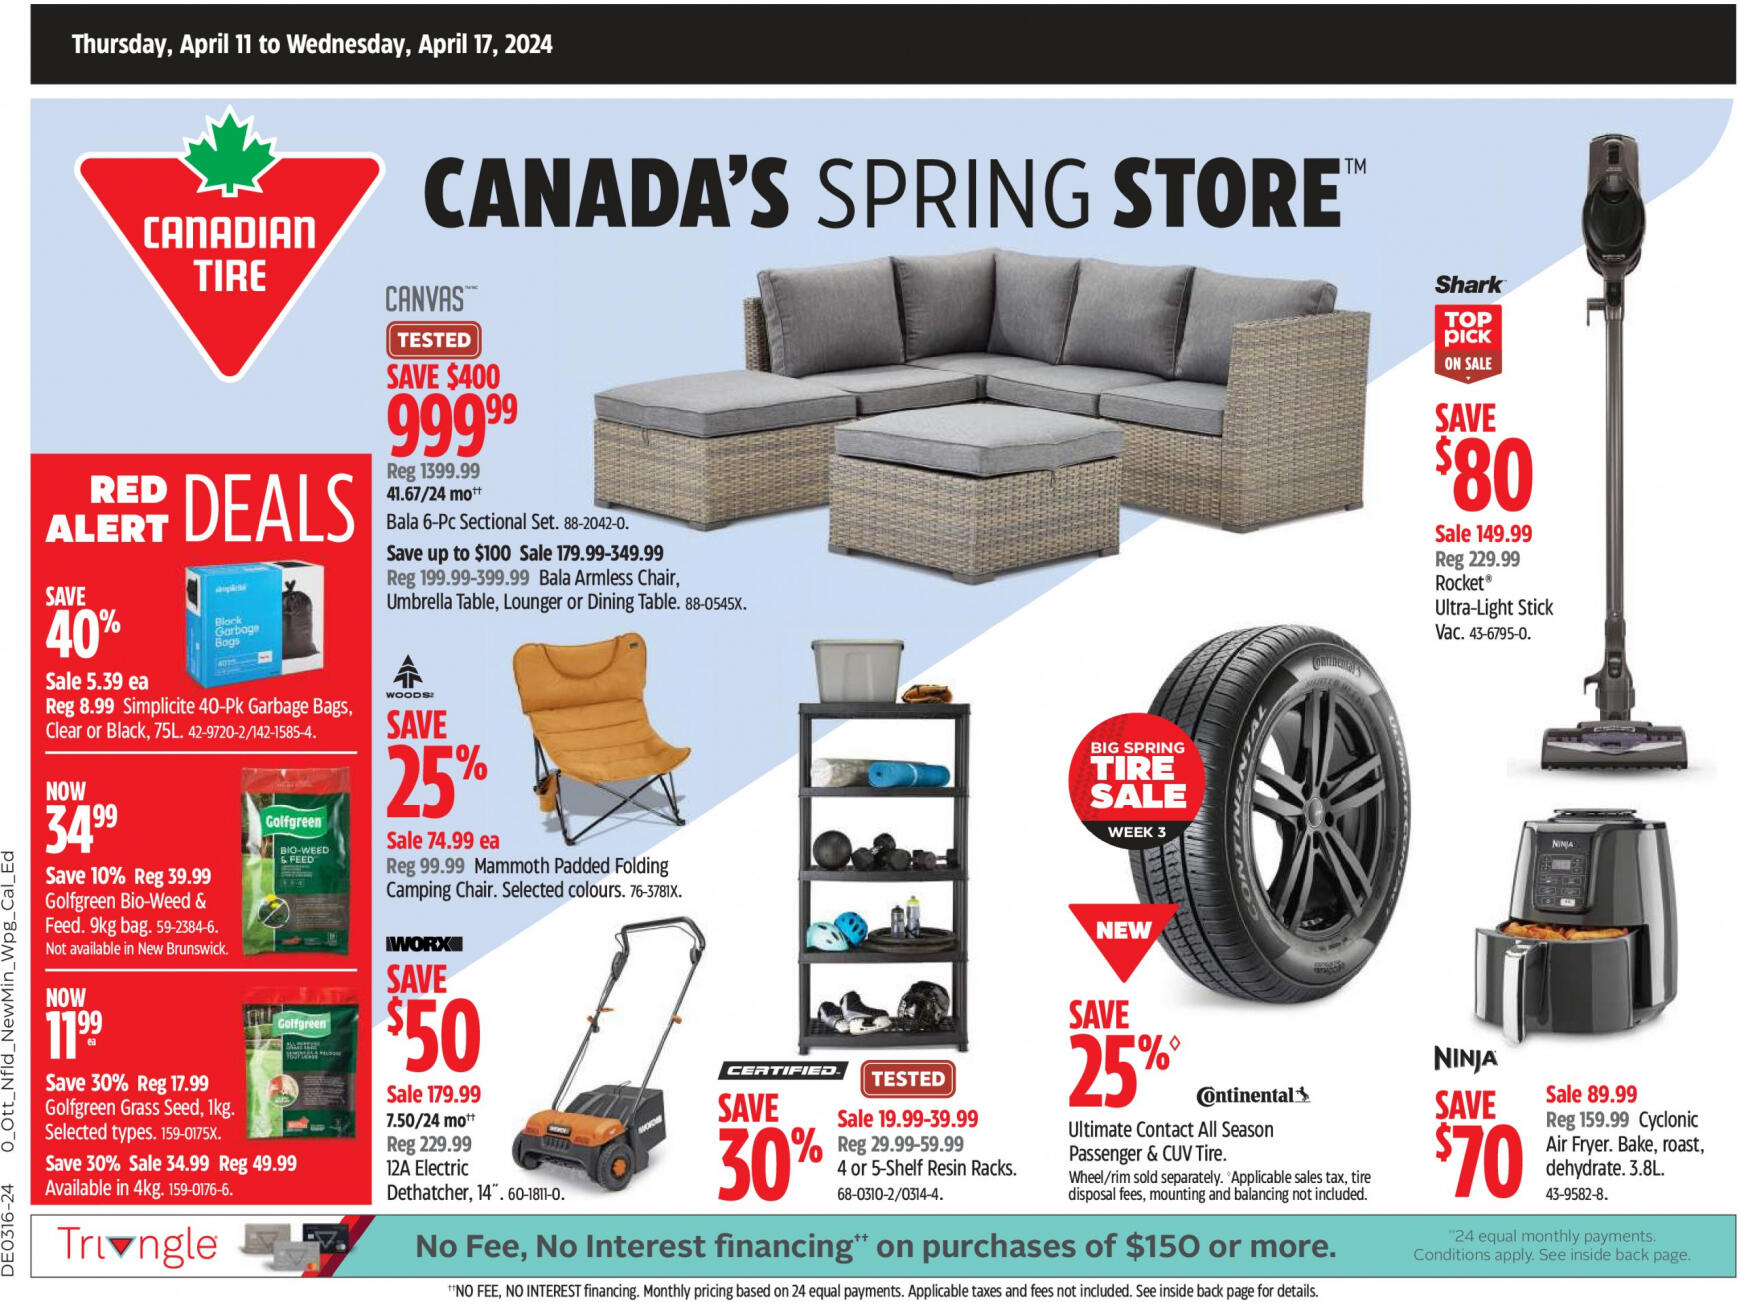 canadian-tire - Canadian Tire flyer current 11.04. - 17.04.